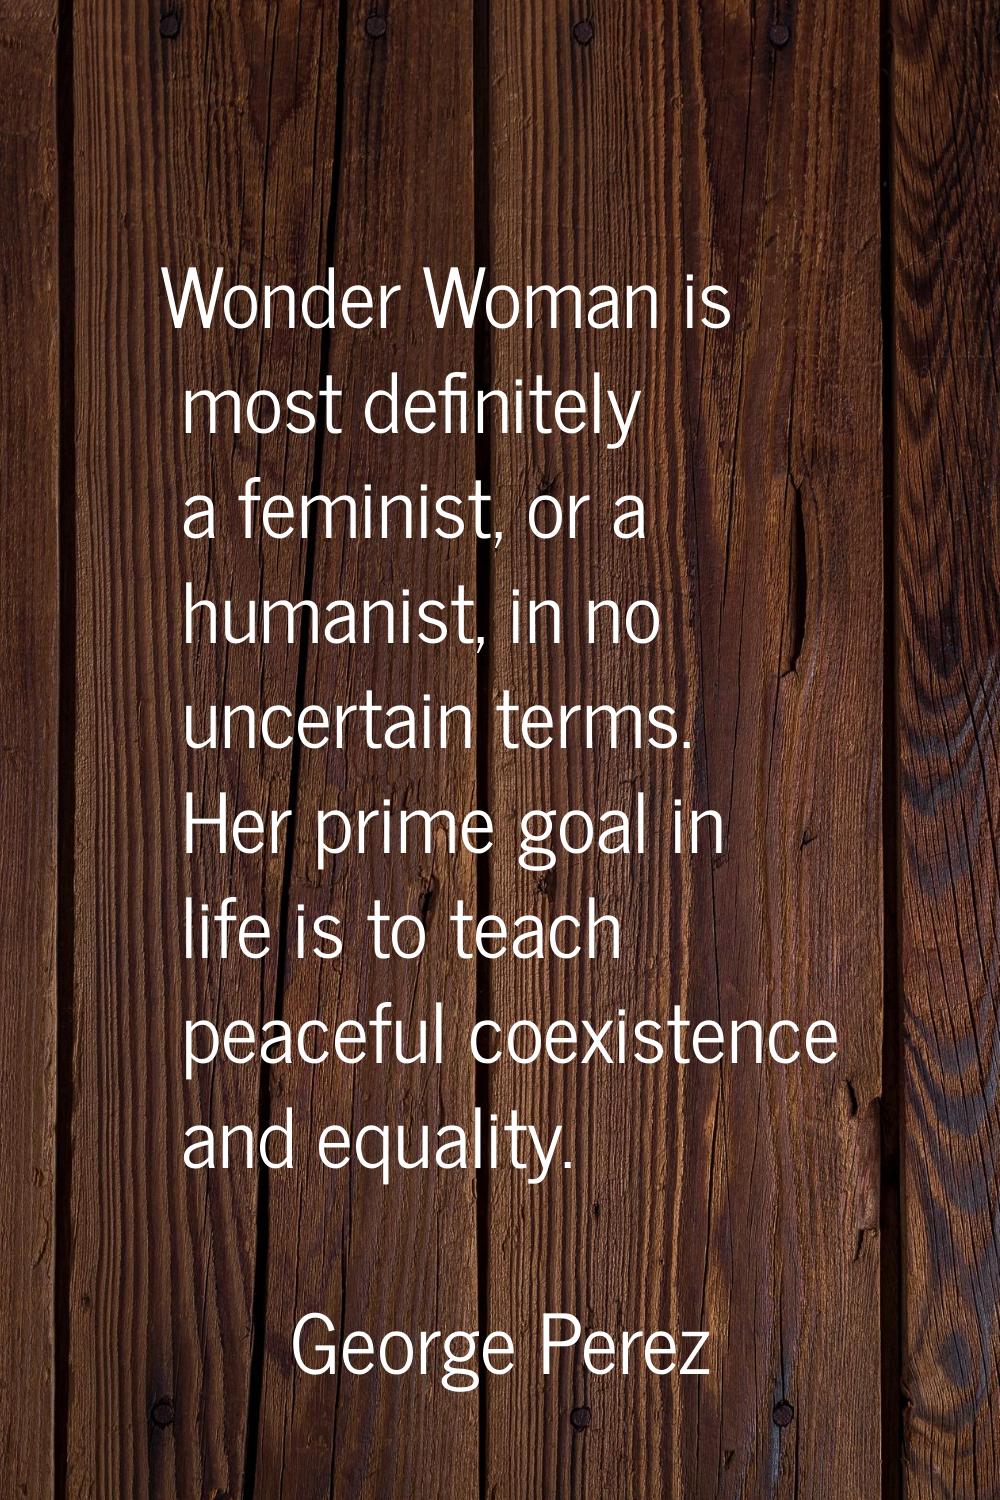 Wonder Woman is most definitely a feminist, or a humanist, in no uncertain terms. Her prime goal in